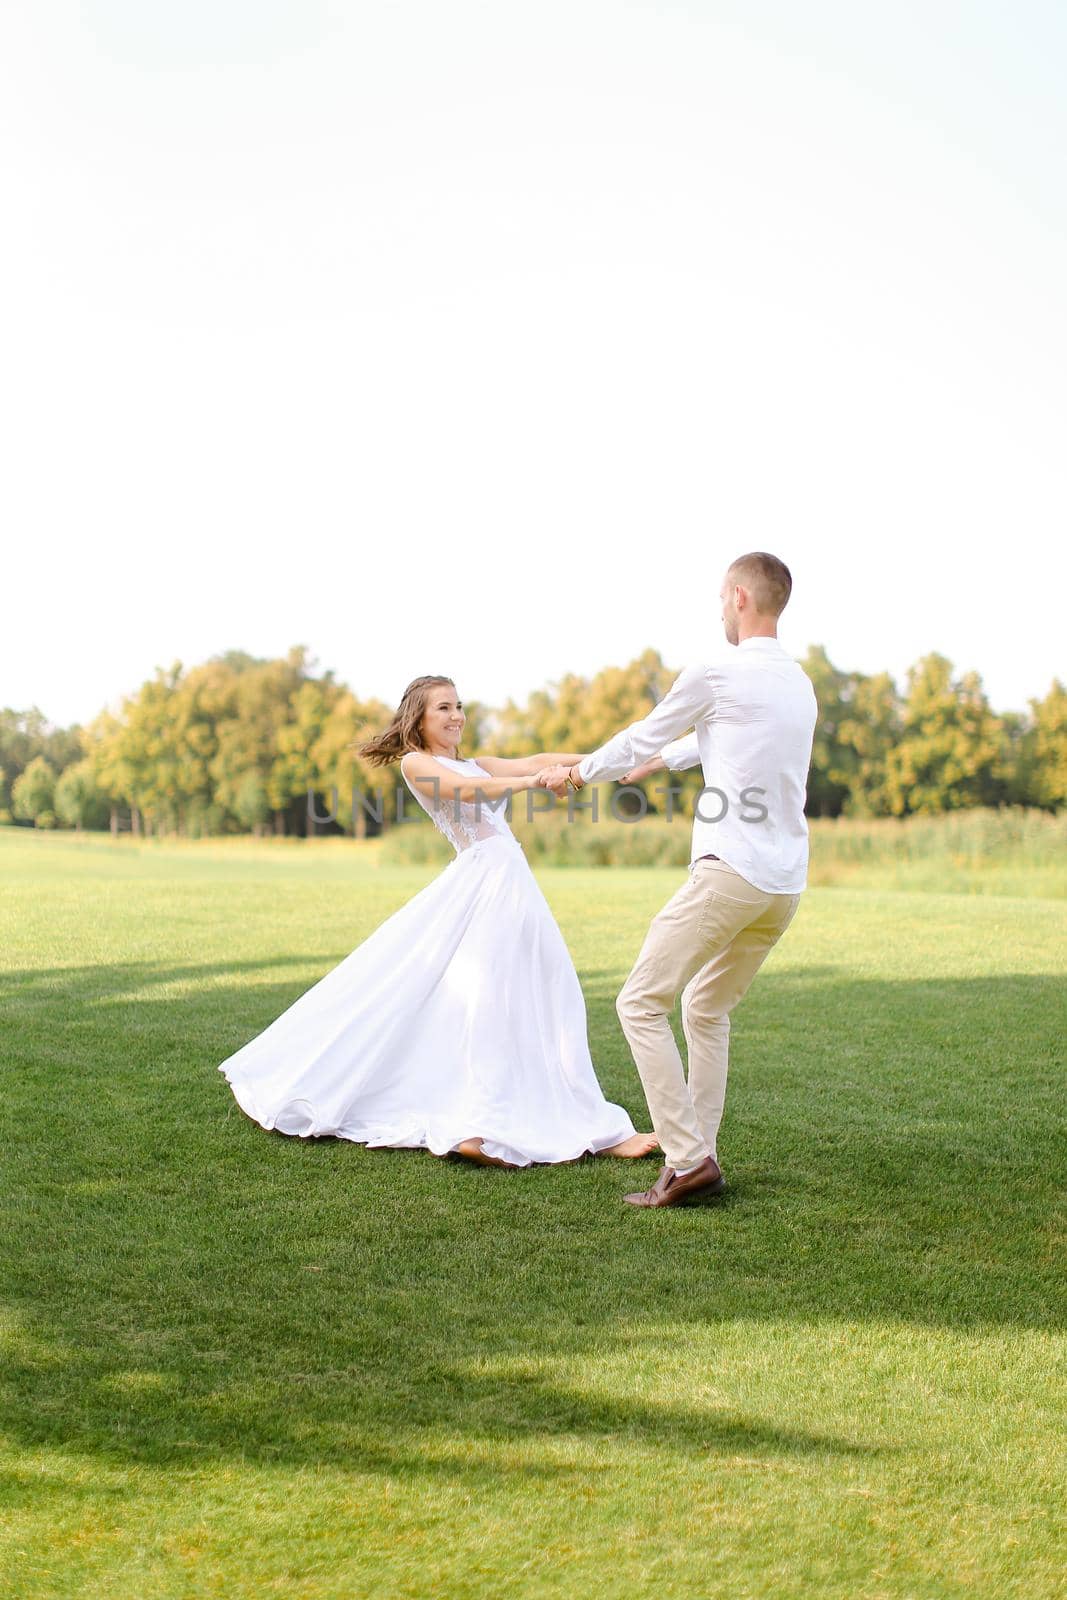 Happy caucasian groom and bride dancing on grass. Concept of wedding photo session on open air and nature.